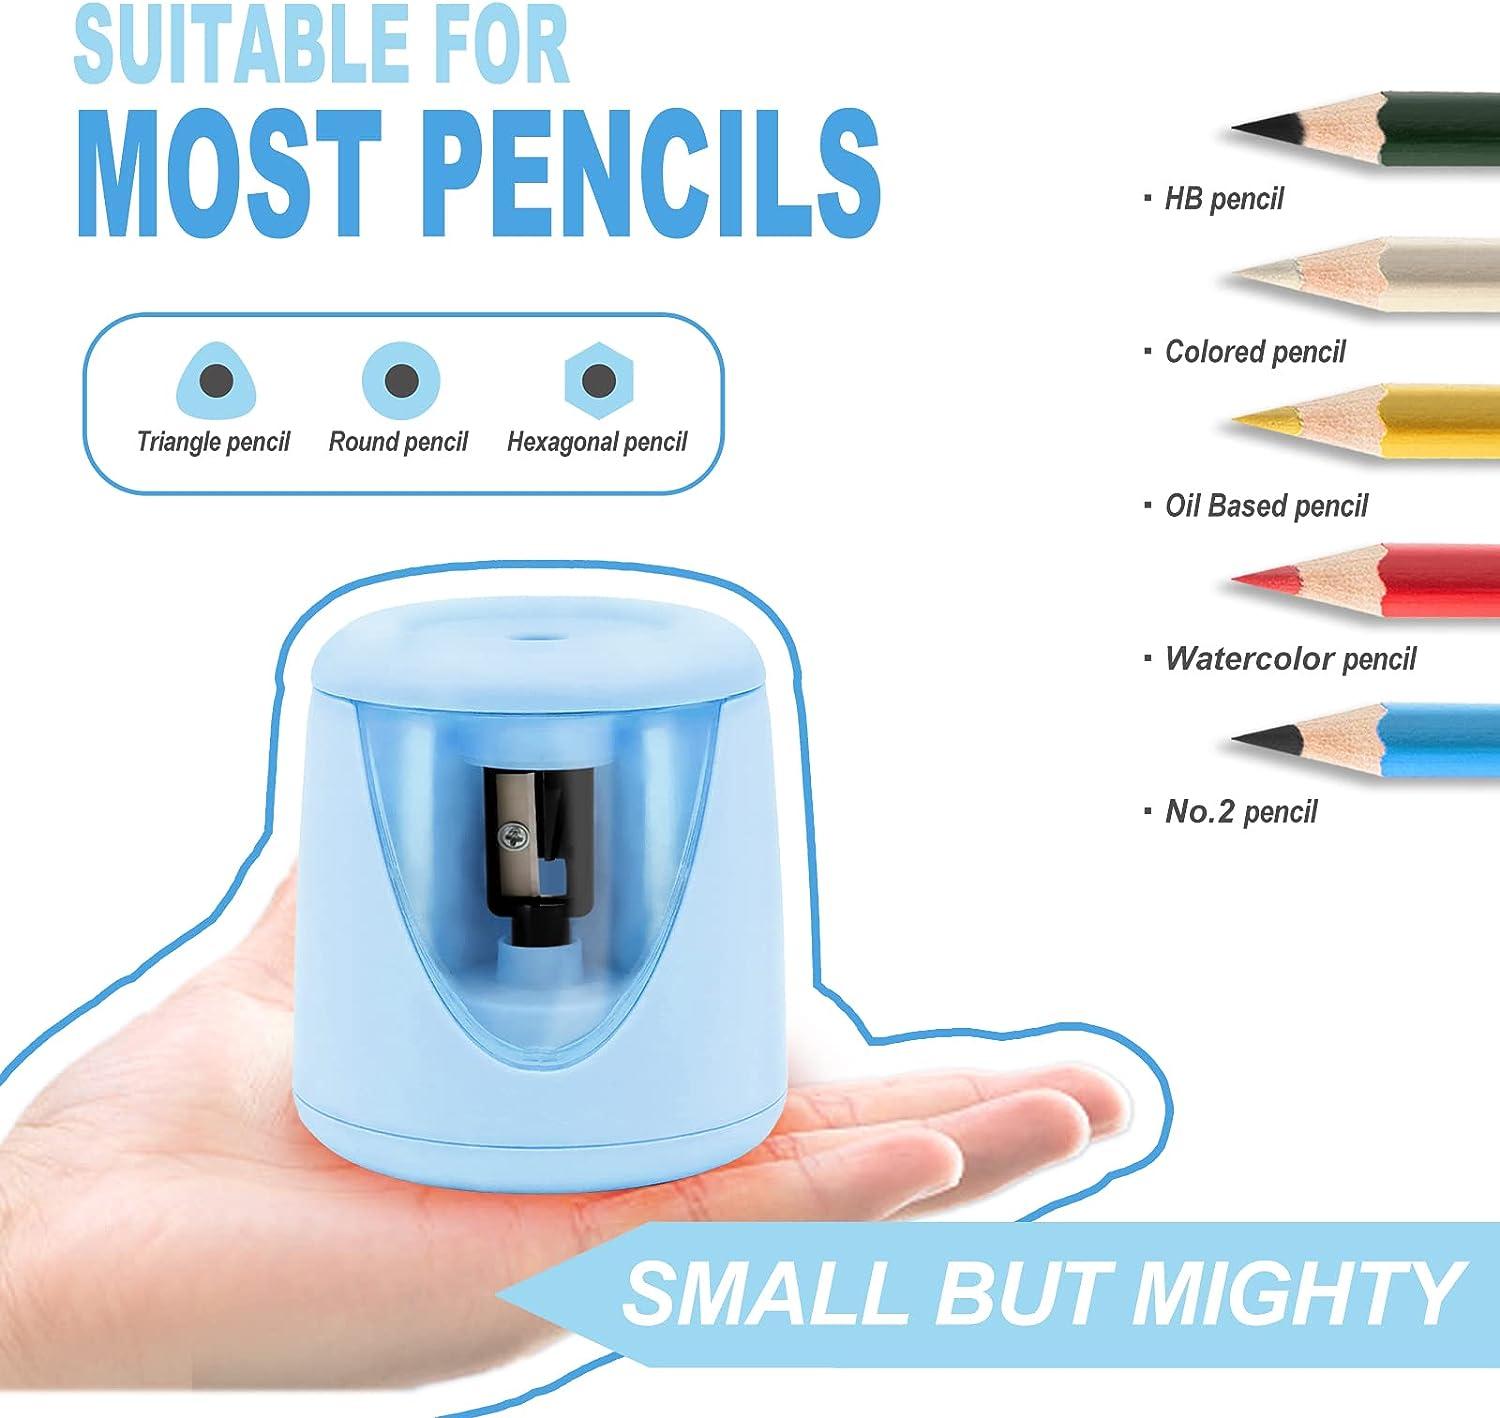 Sonuimy Pencil Sharpeners, 4 Pcs Pencil Sharpeners Manual,Dual Holes  Compact Colored Handheld Pencil Sharpener for Kids with Lid Adults Students